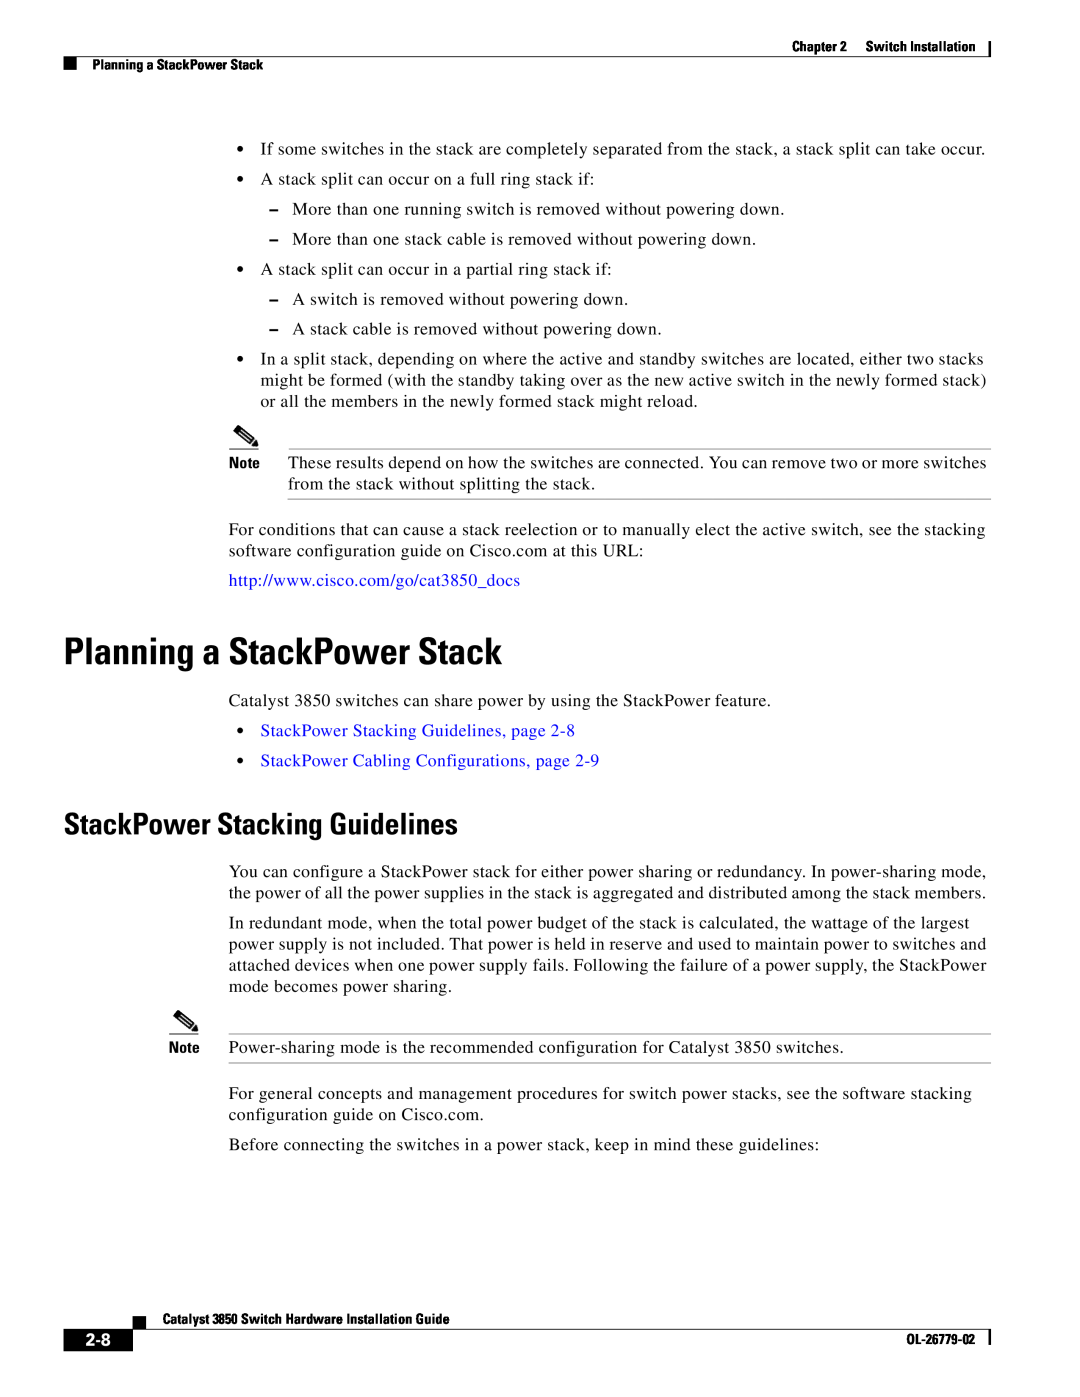 Cisco Systems WSC385024TS, C3850NM210G, C3850NM41G manual Planning a StackPower Stack, StackPower Stacking Guidelines 